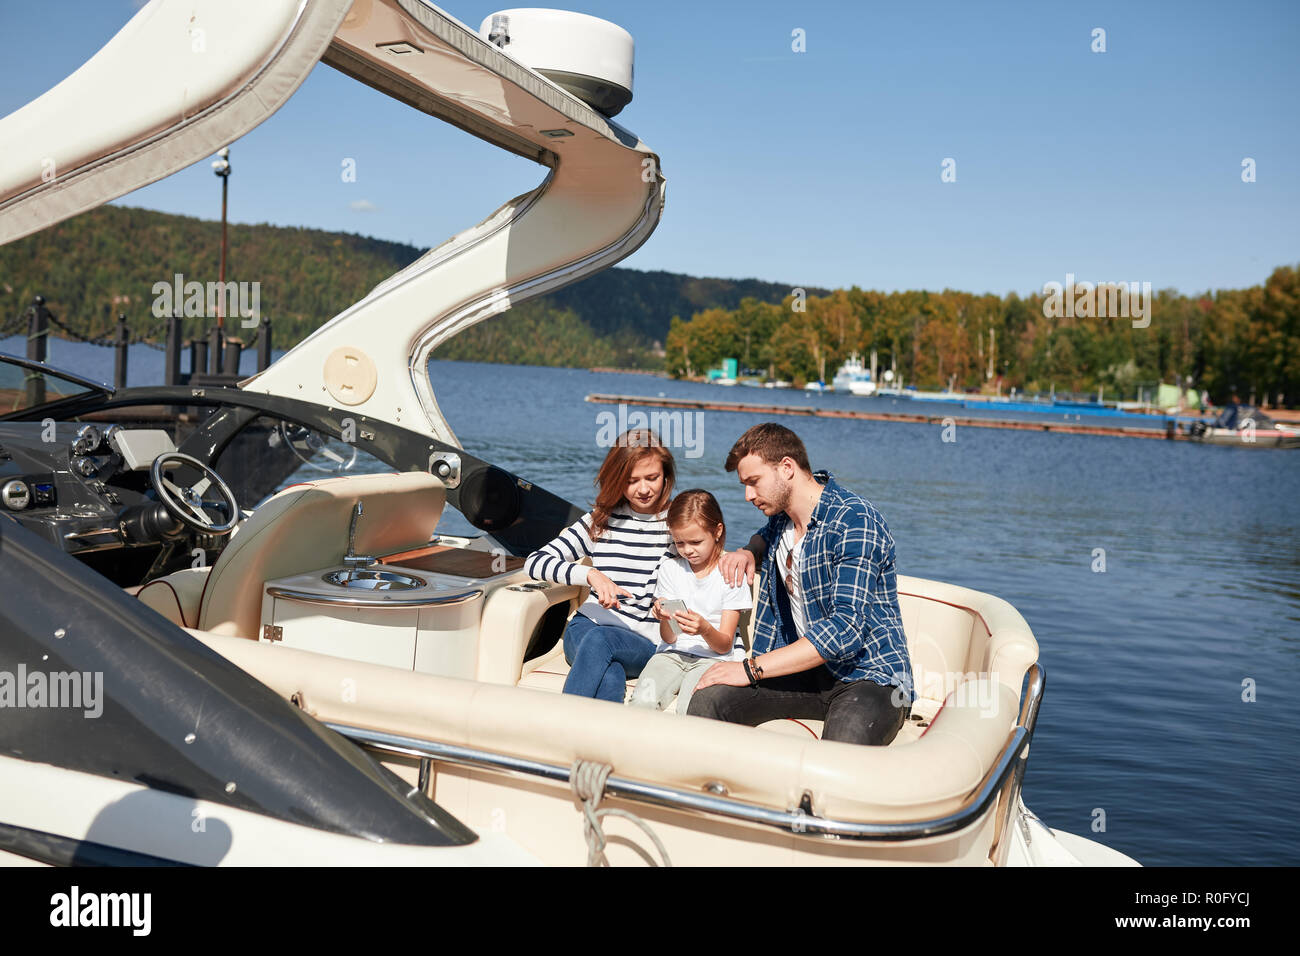 Family with daughter vacation together on sailboat in lake Stock Photo